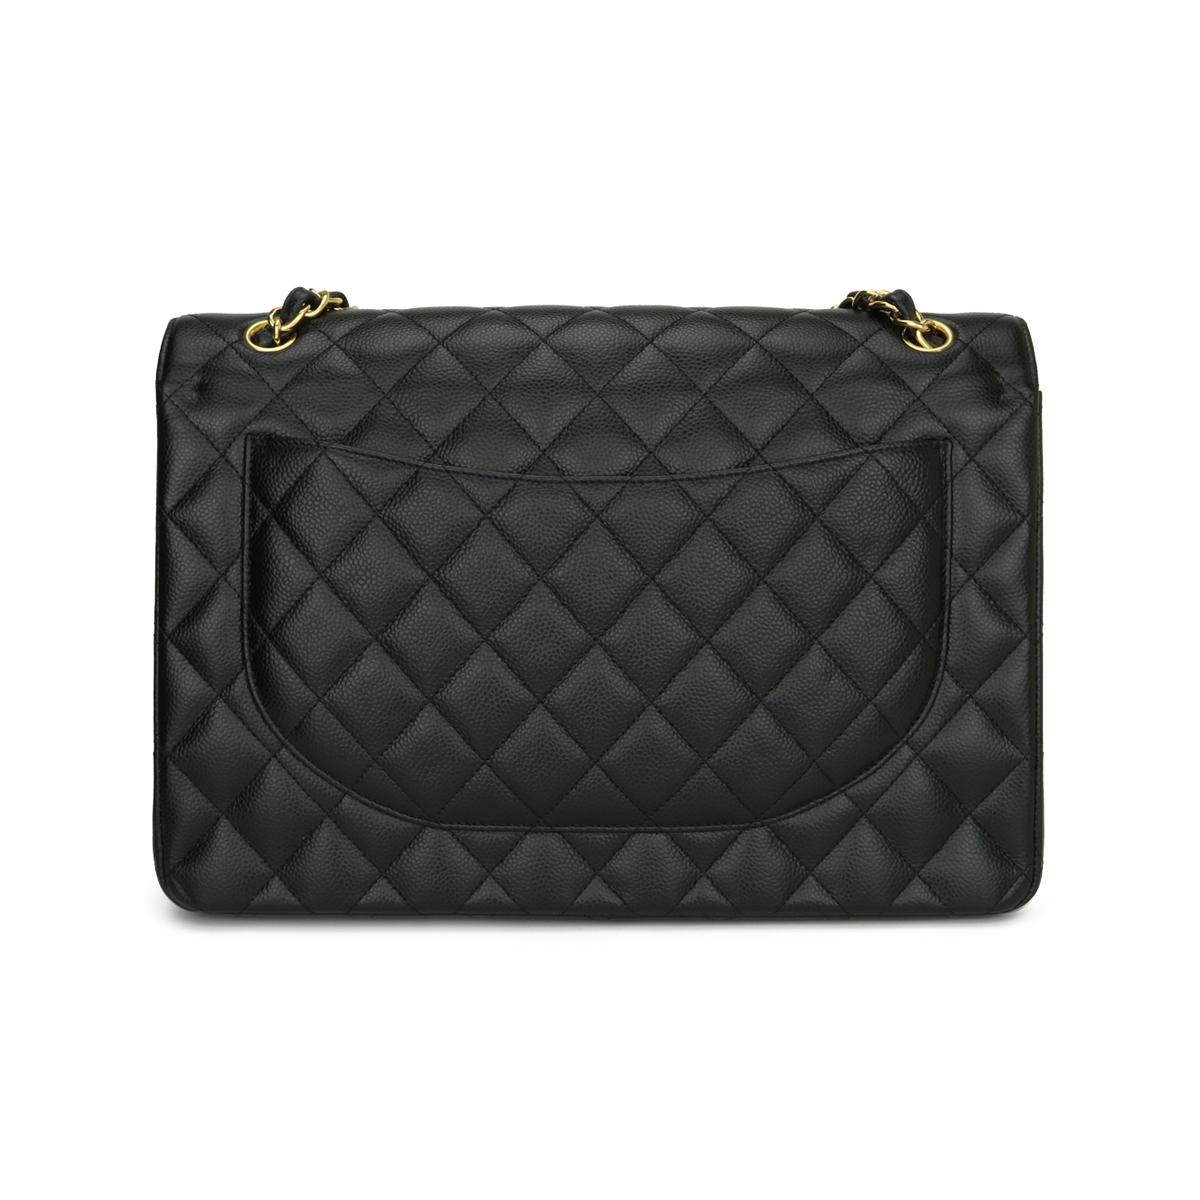 chanel maxi flap bag in black caviar with gold hardware